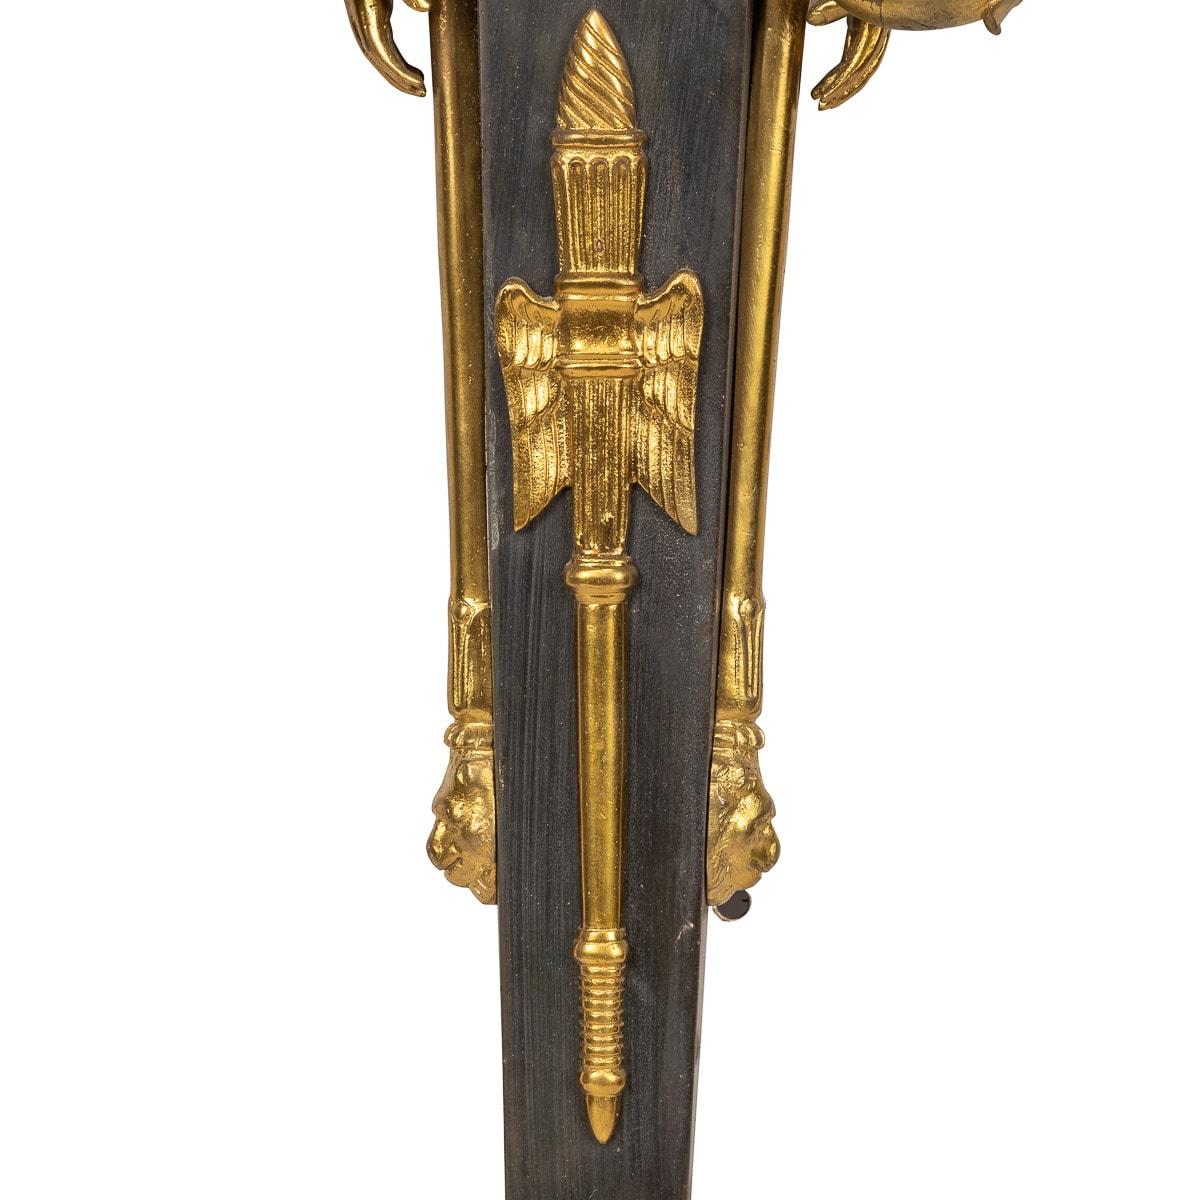 Neoclassical 19th Century French Egyptian Revival Part Ormolu D'appliques Wall Lights, c 1830 For Sale